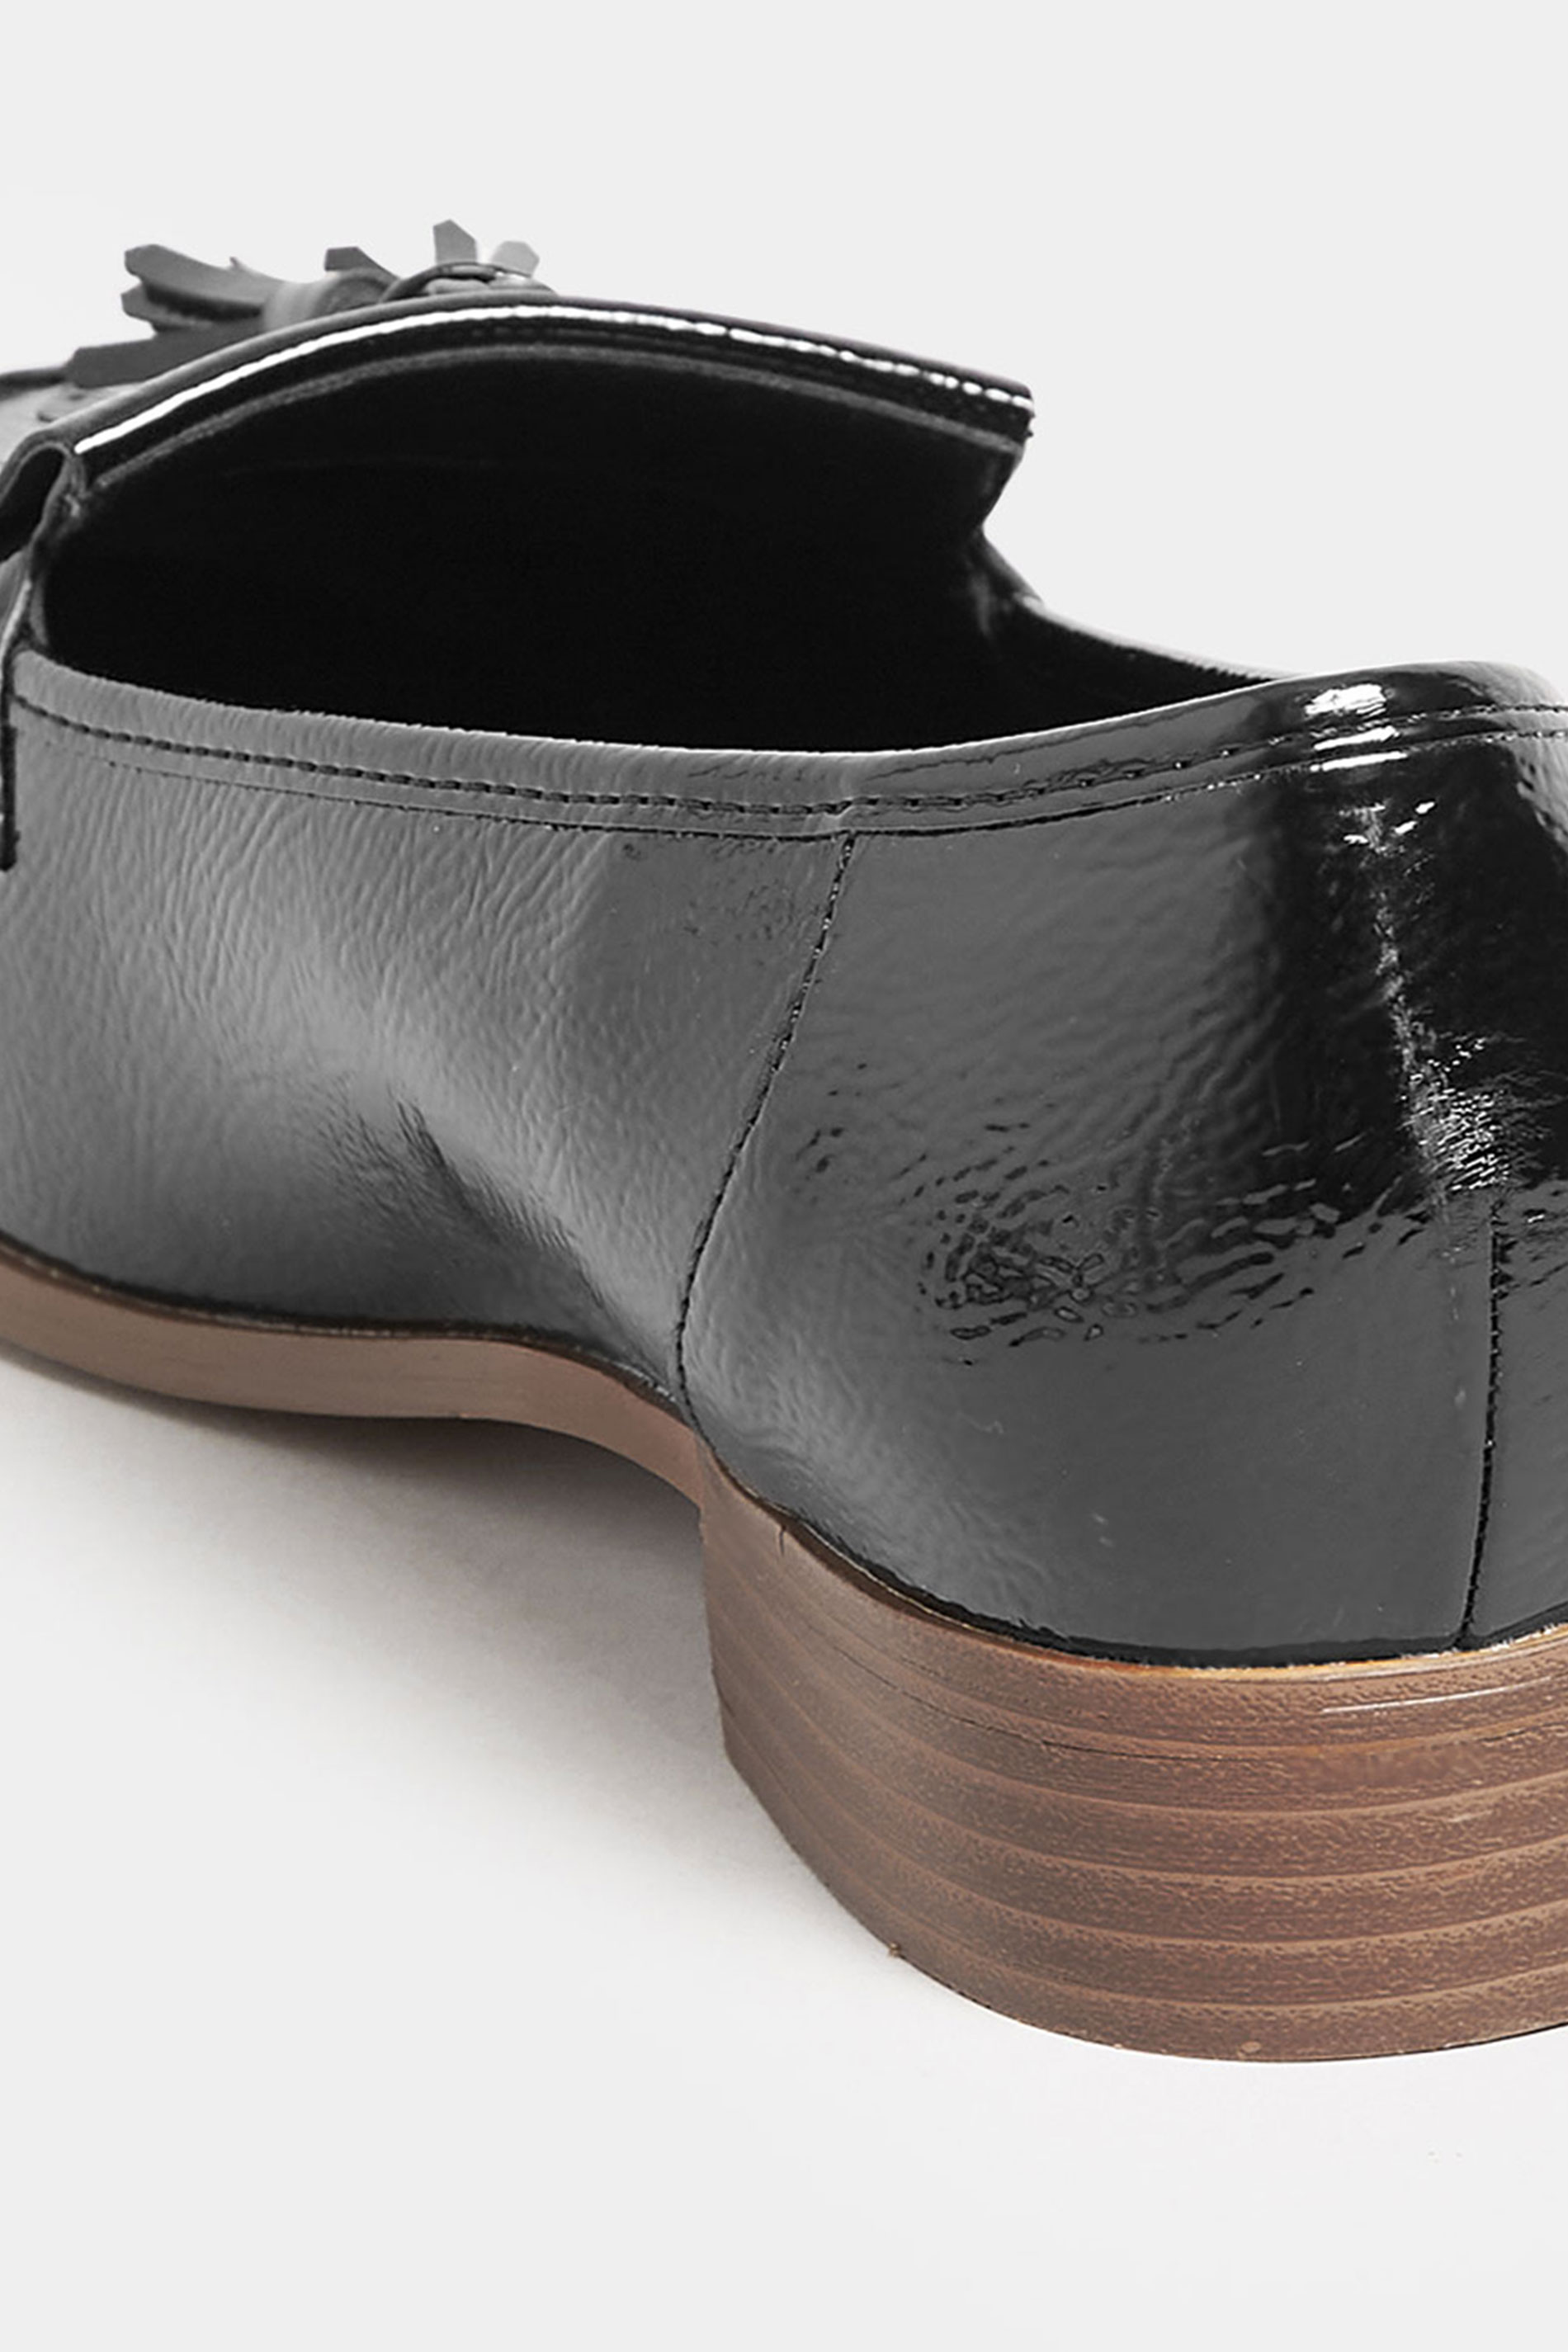 Plus Size Black Patent Loafers In Wide E Fit & Extra Wide EEE Fit